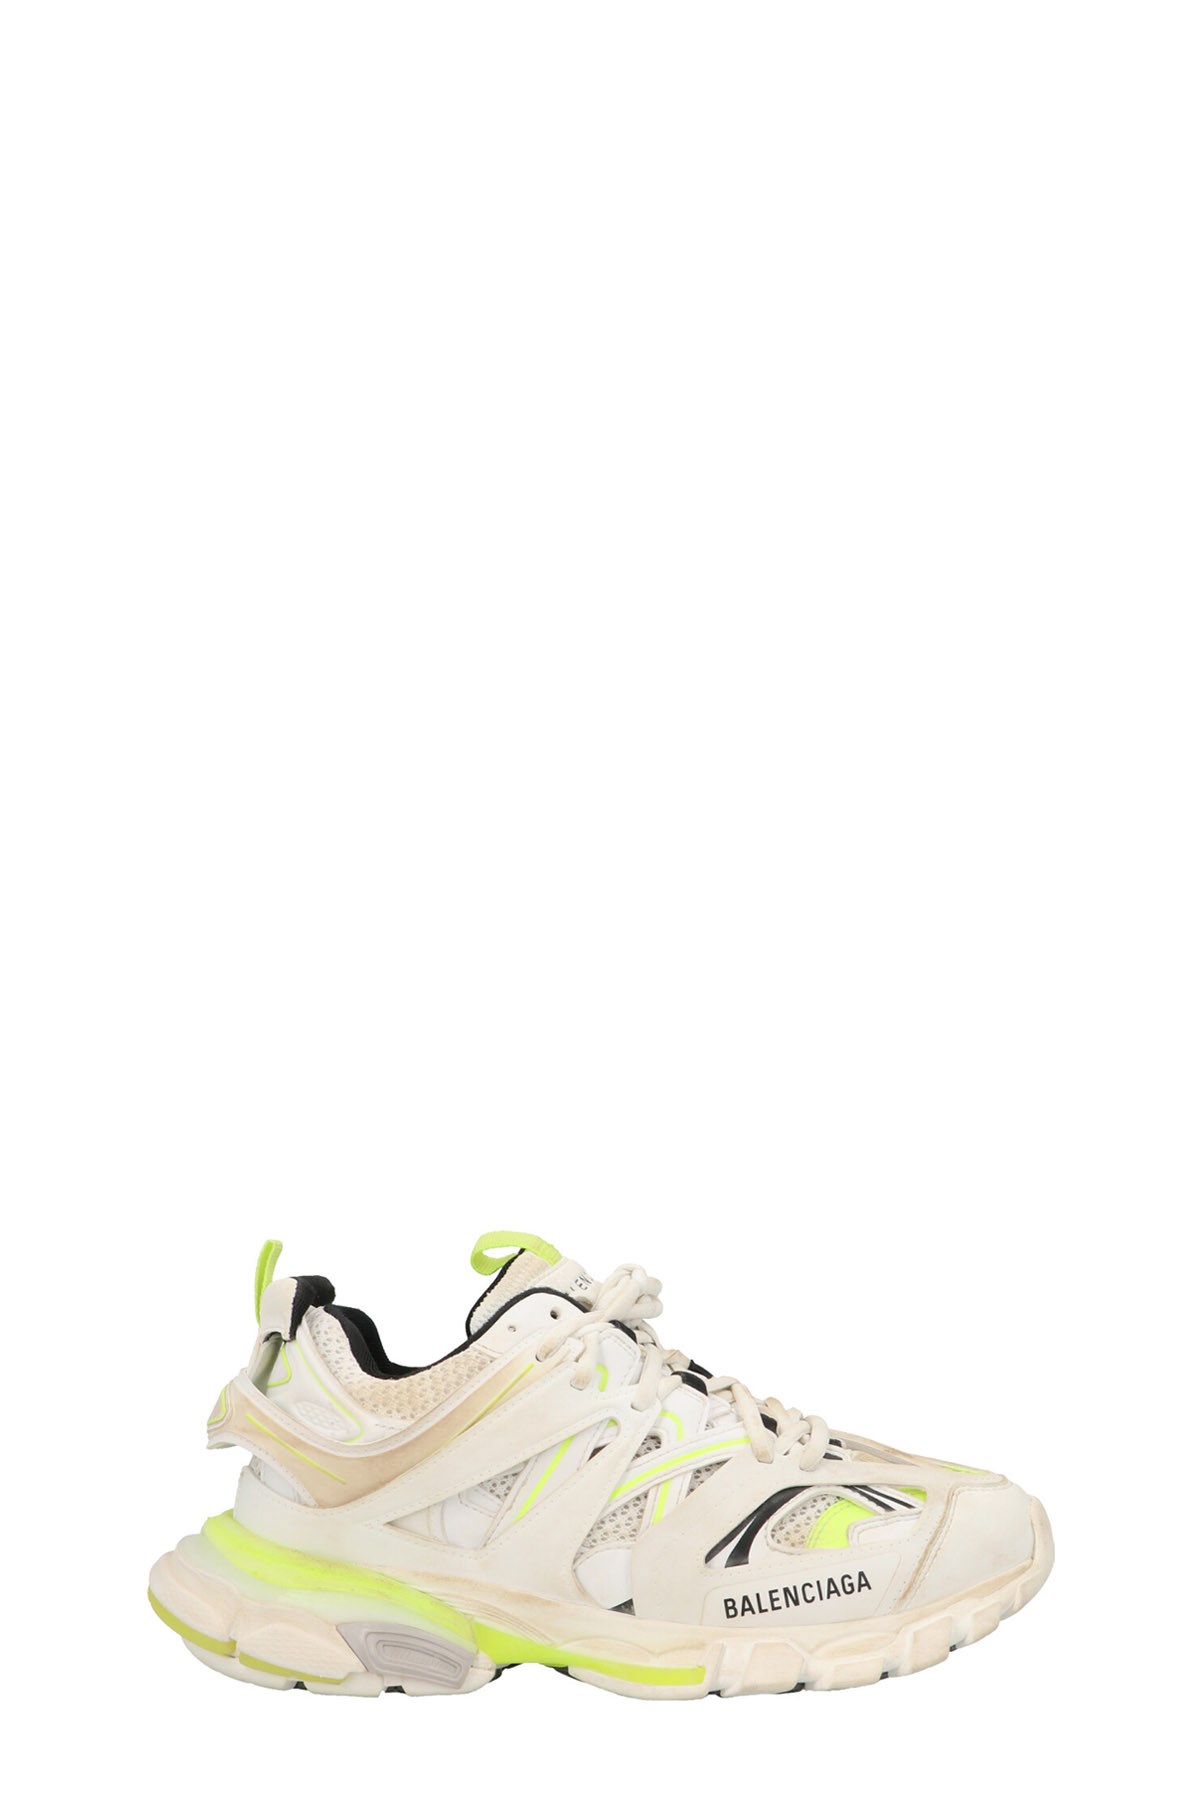 BALENCIAGA 'Track Worn Out' Sneakers